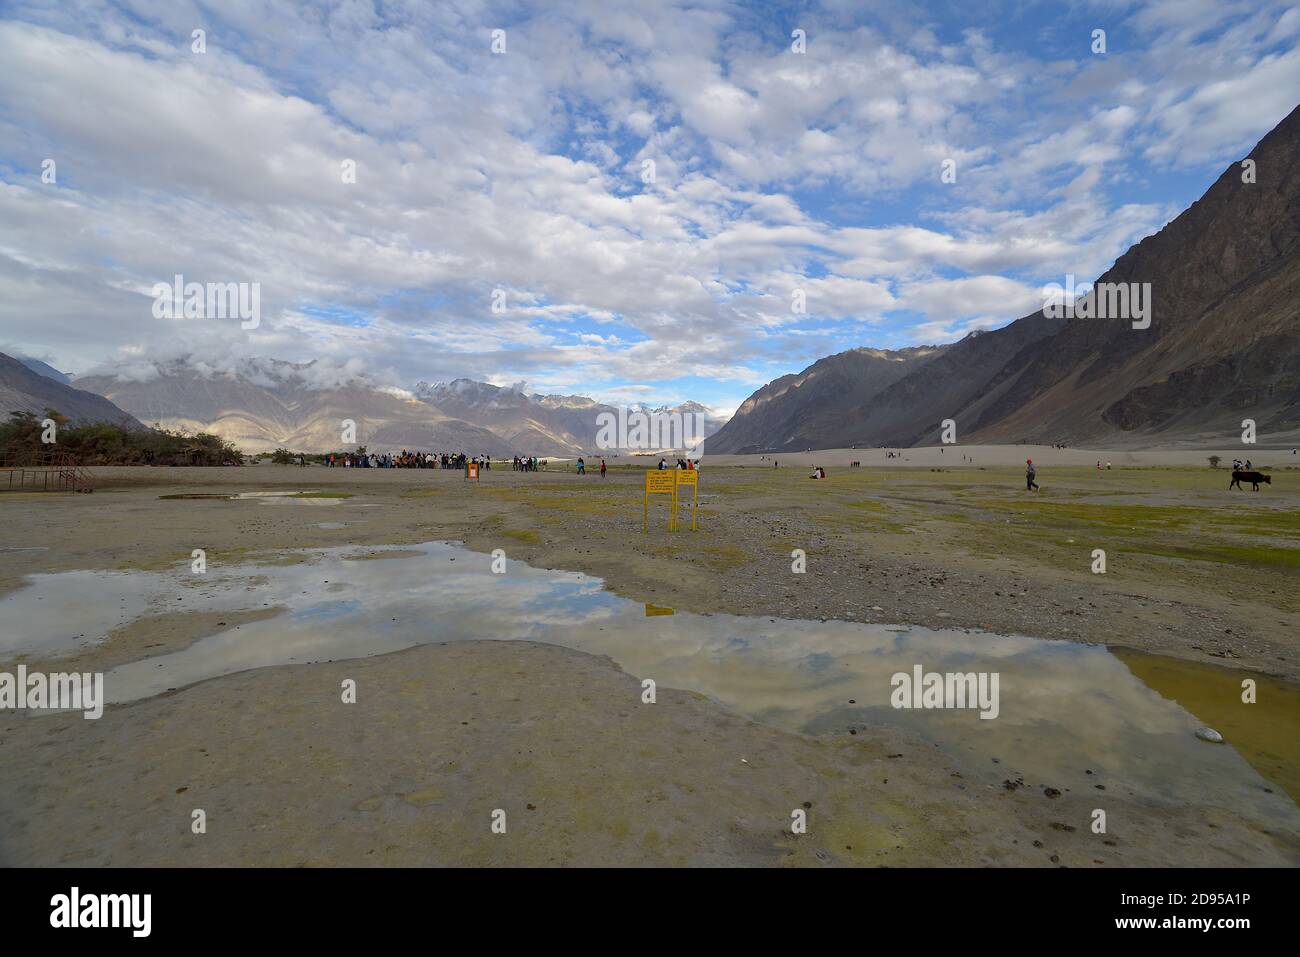 Scenic view of the Nubra Valley in late summer, with tourists setting out on evening camel safaris in the distant background Stock Photo